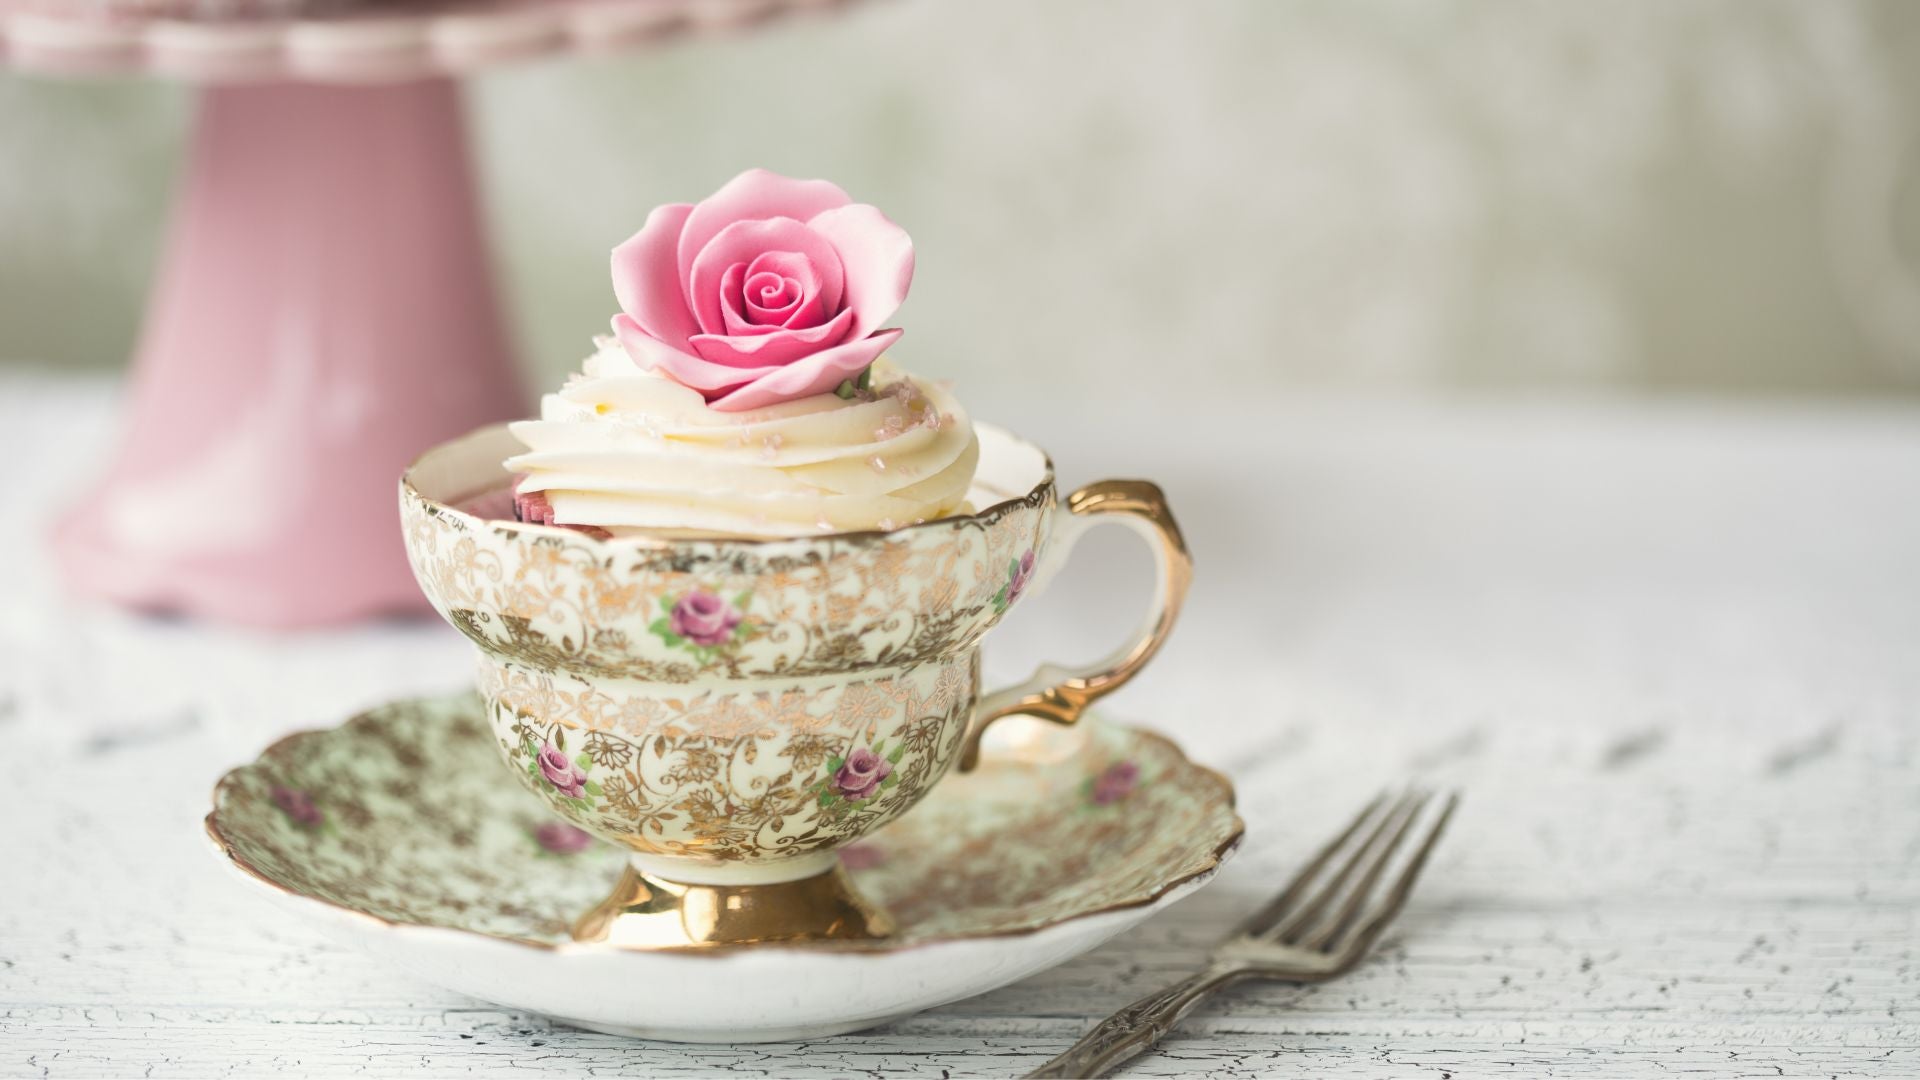 Collombatti Naturals 5 ways to reduce waste over Christmas picture of a tea cup with a cake in it